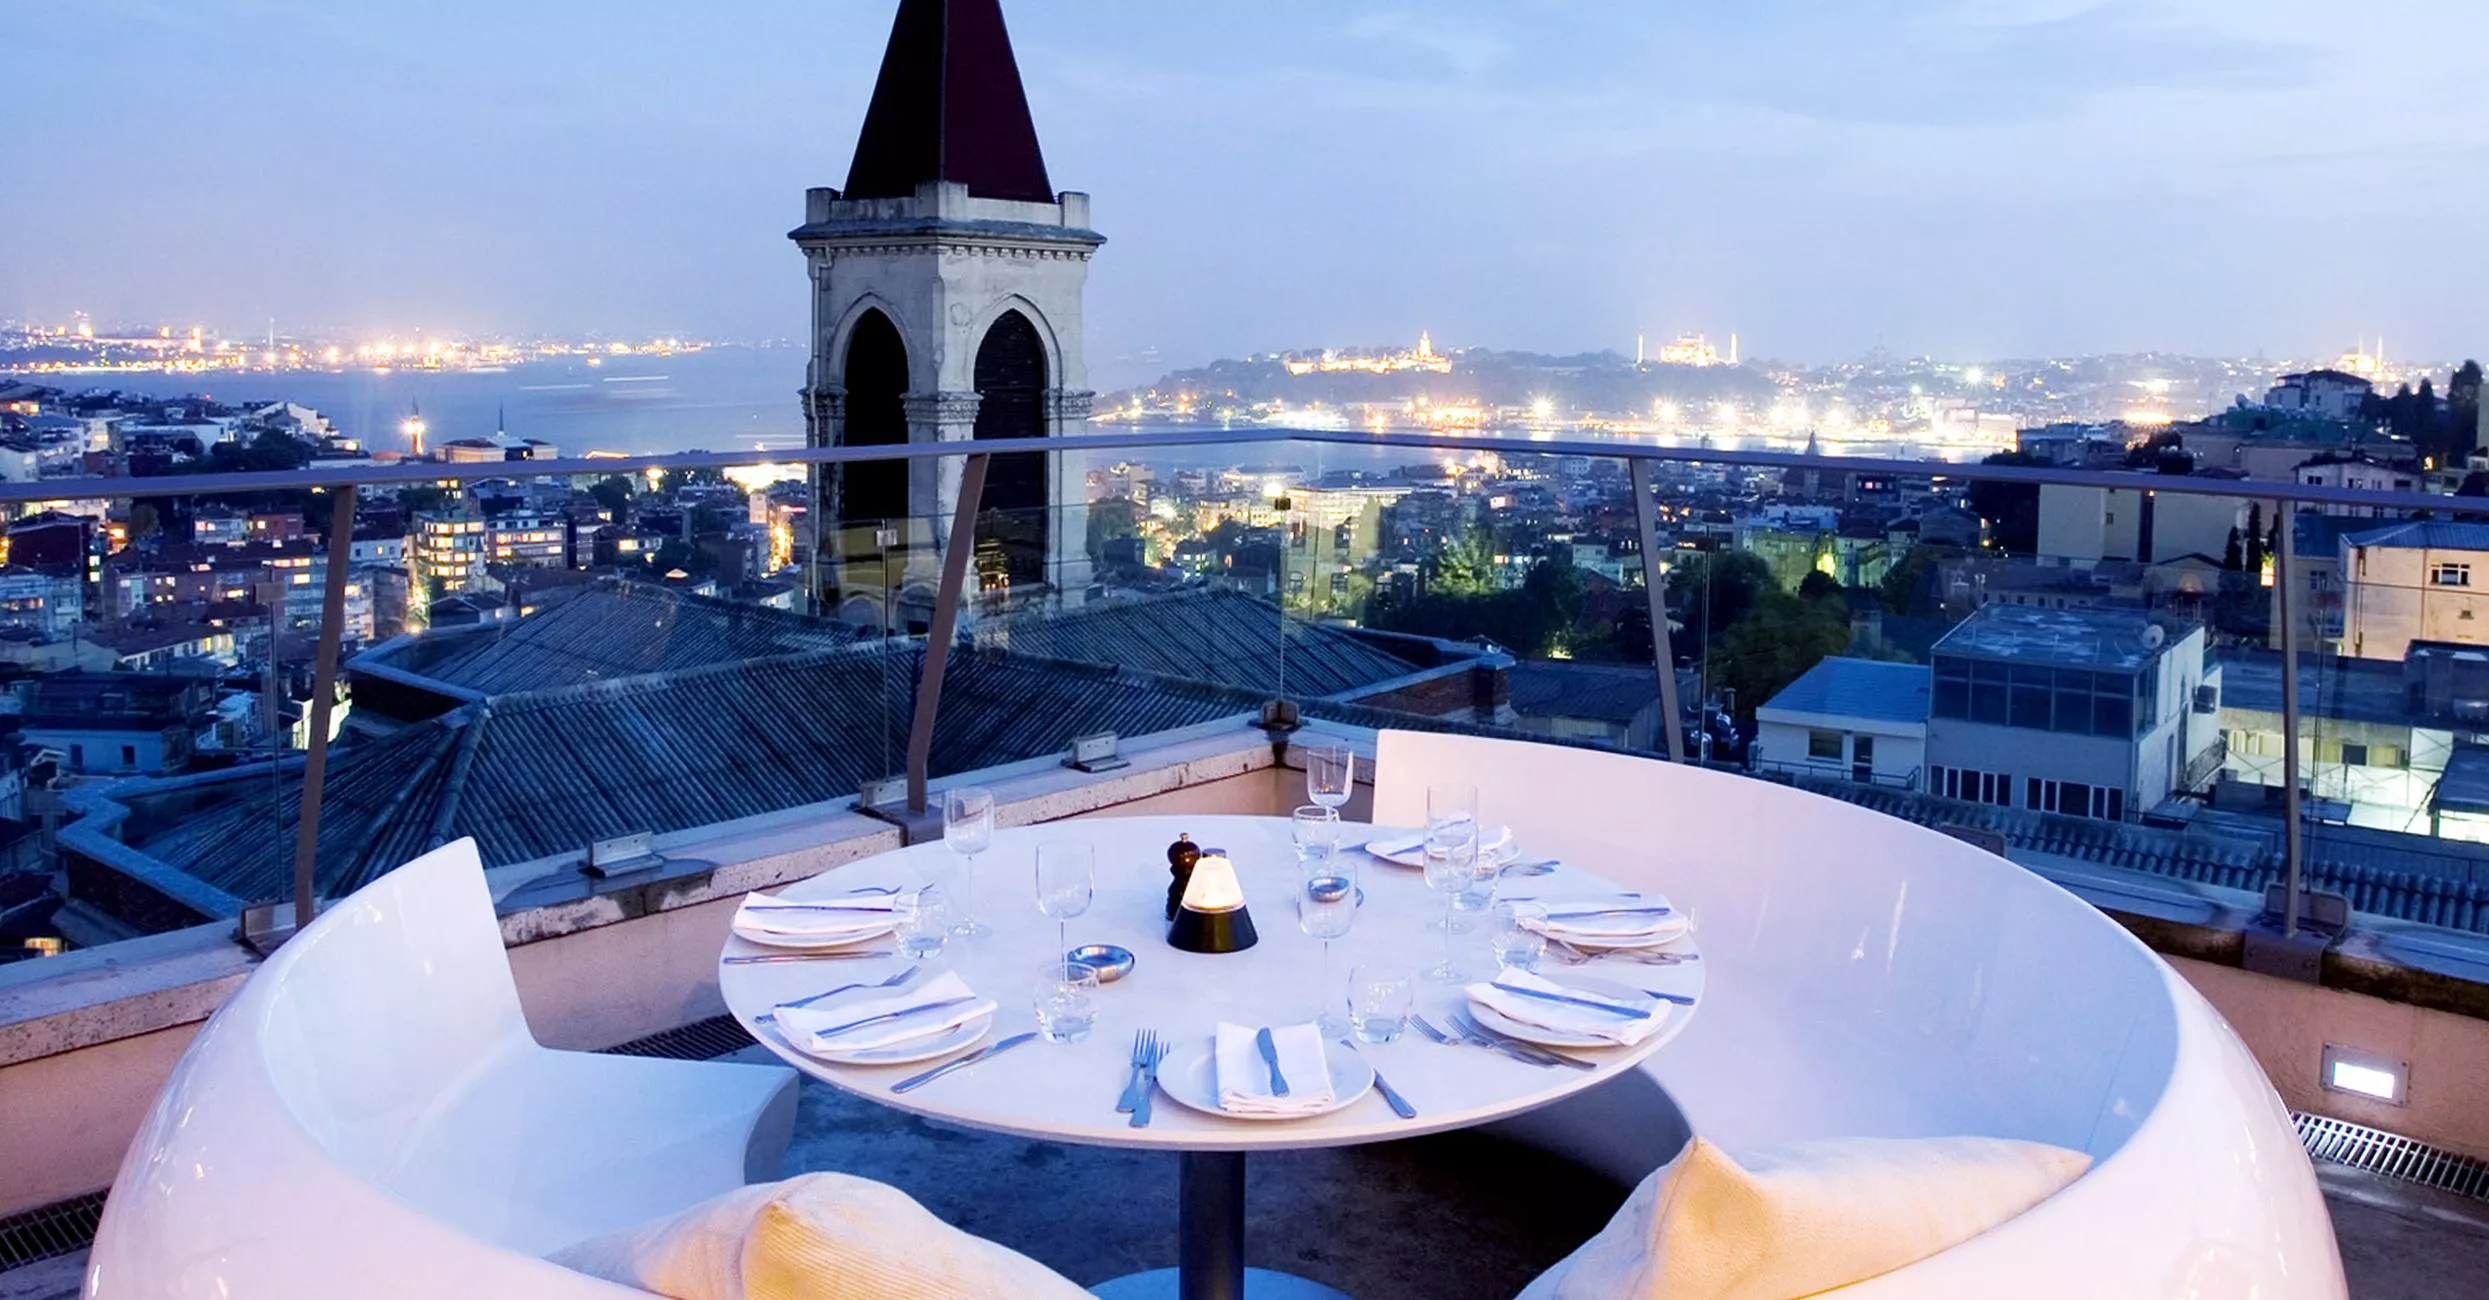 360 Istanbul in Turkey, Central Asia | Restaurants - Rated 3.6